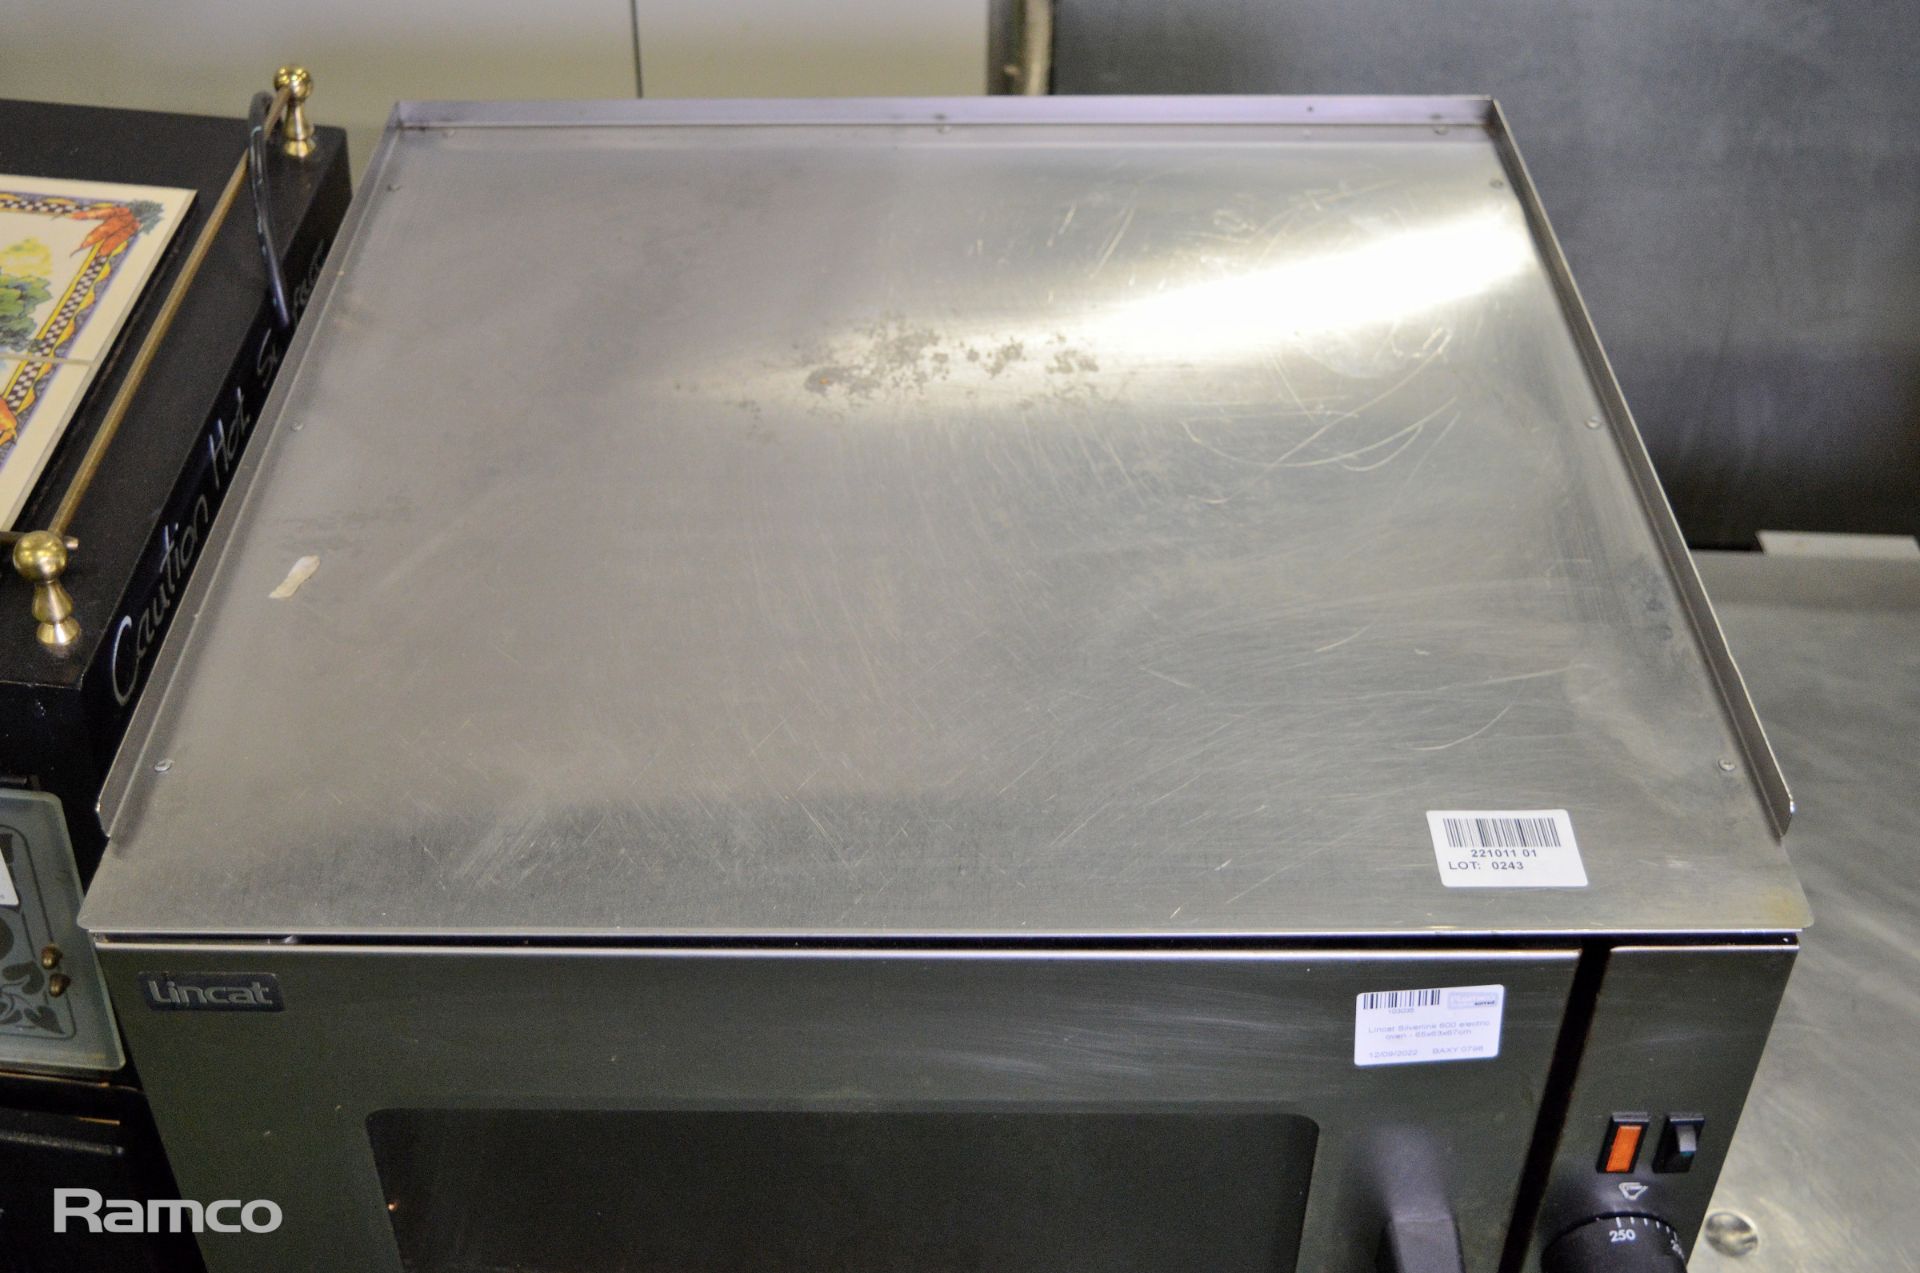 Lincat Silverlink 600 electric oven - 65x63x67cm - Image 4 of 6